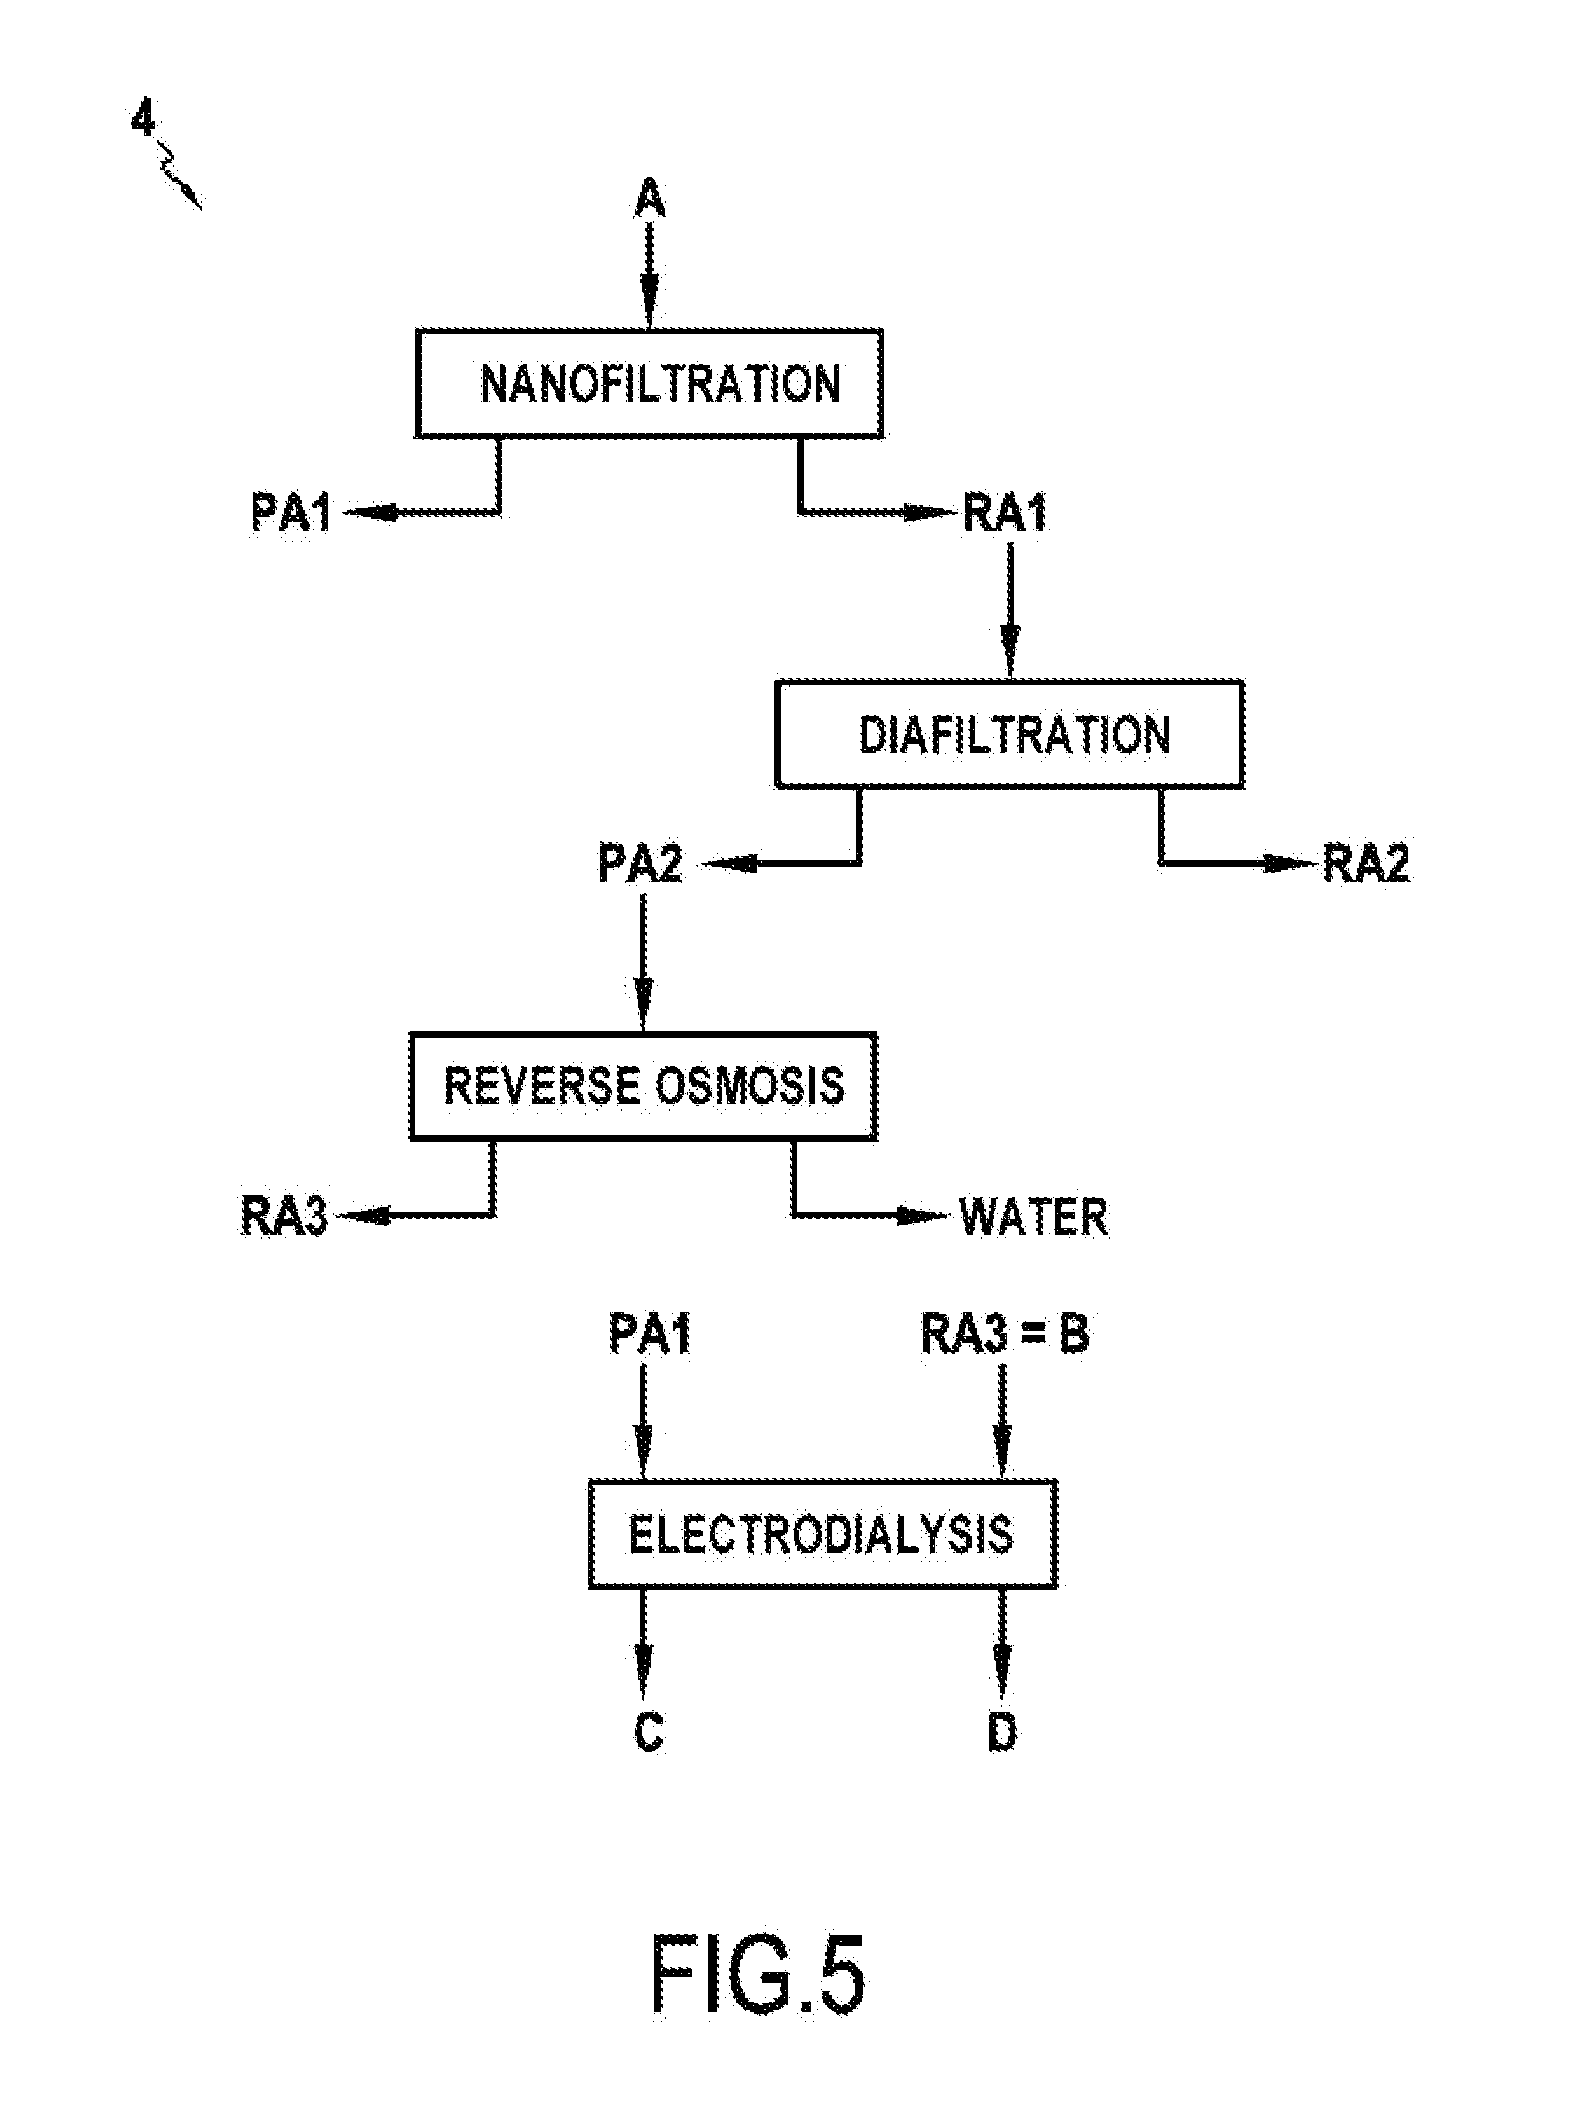 Method for recirculating a reprocessing effluent comprising chloride ions